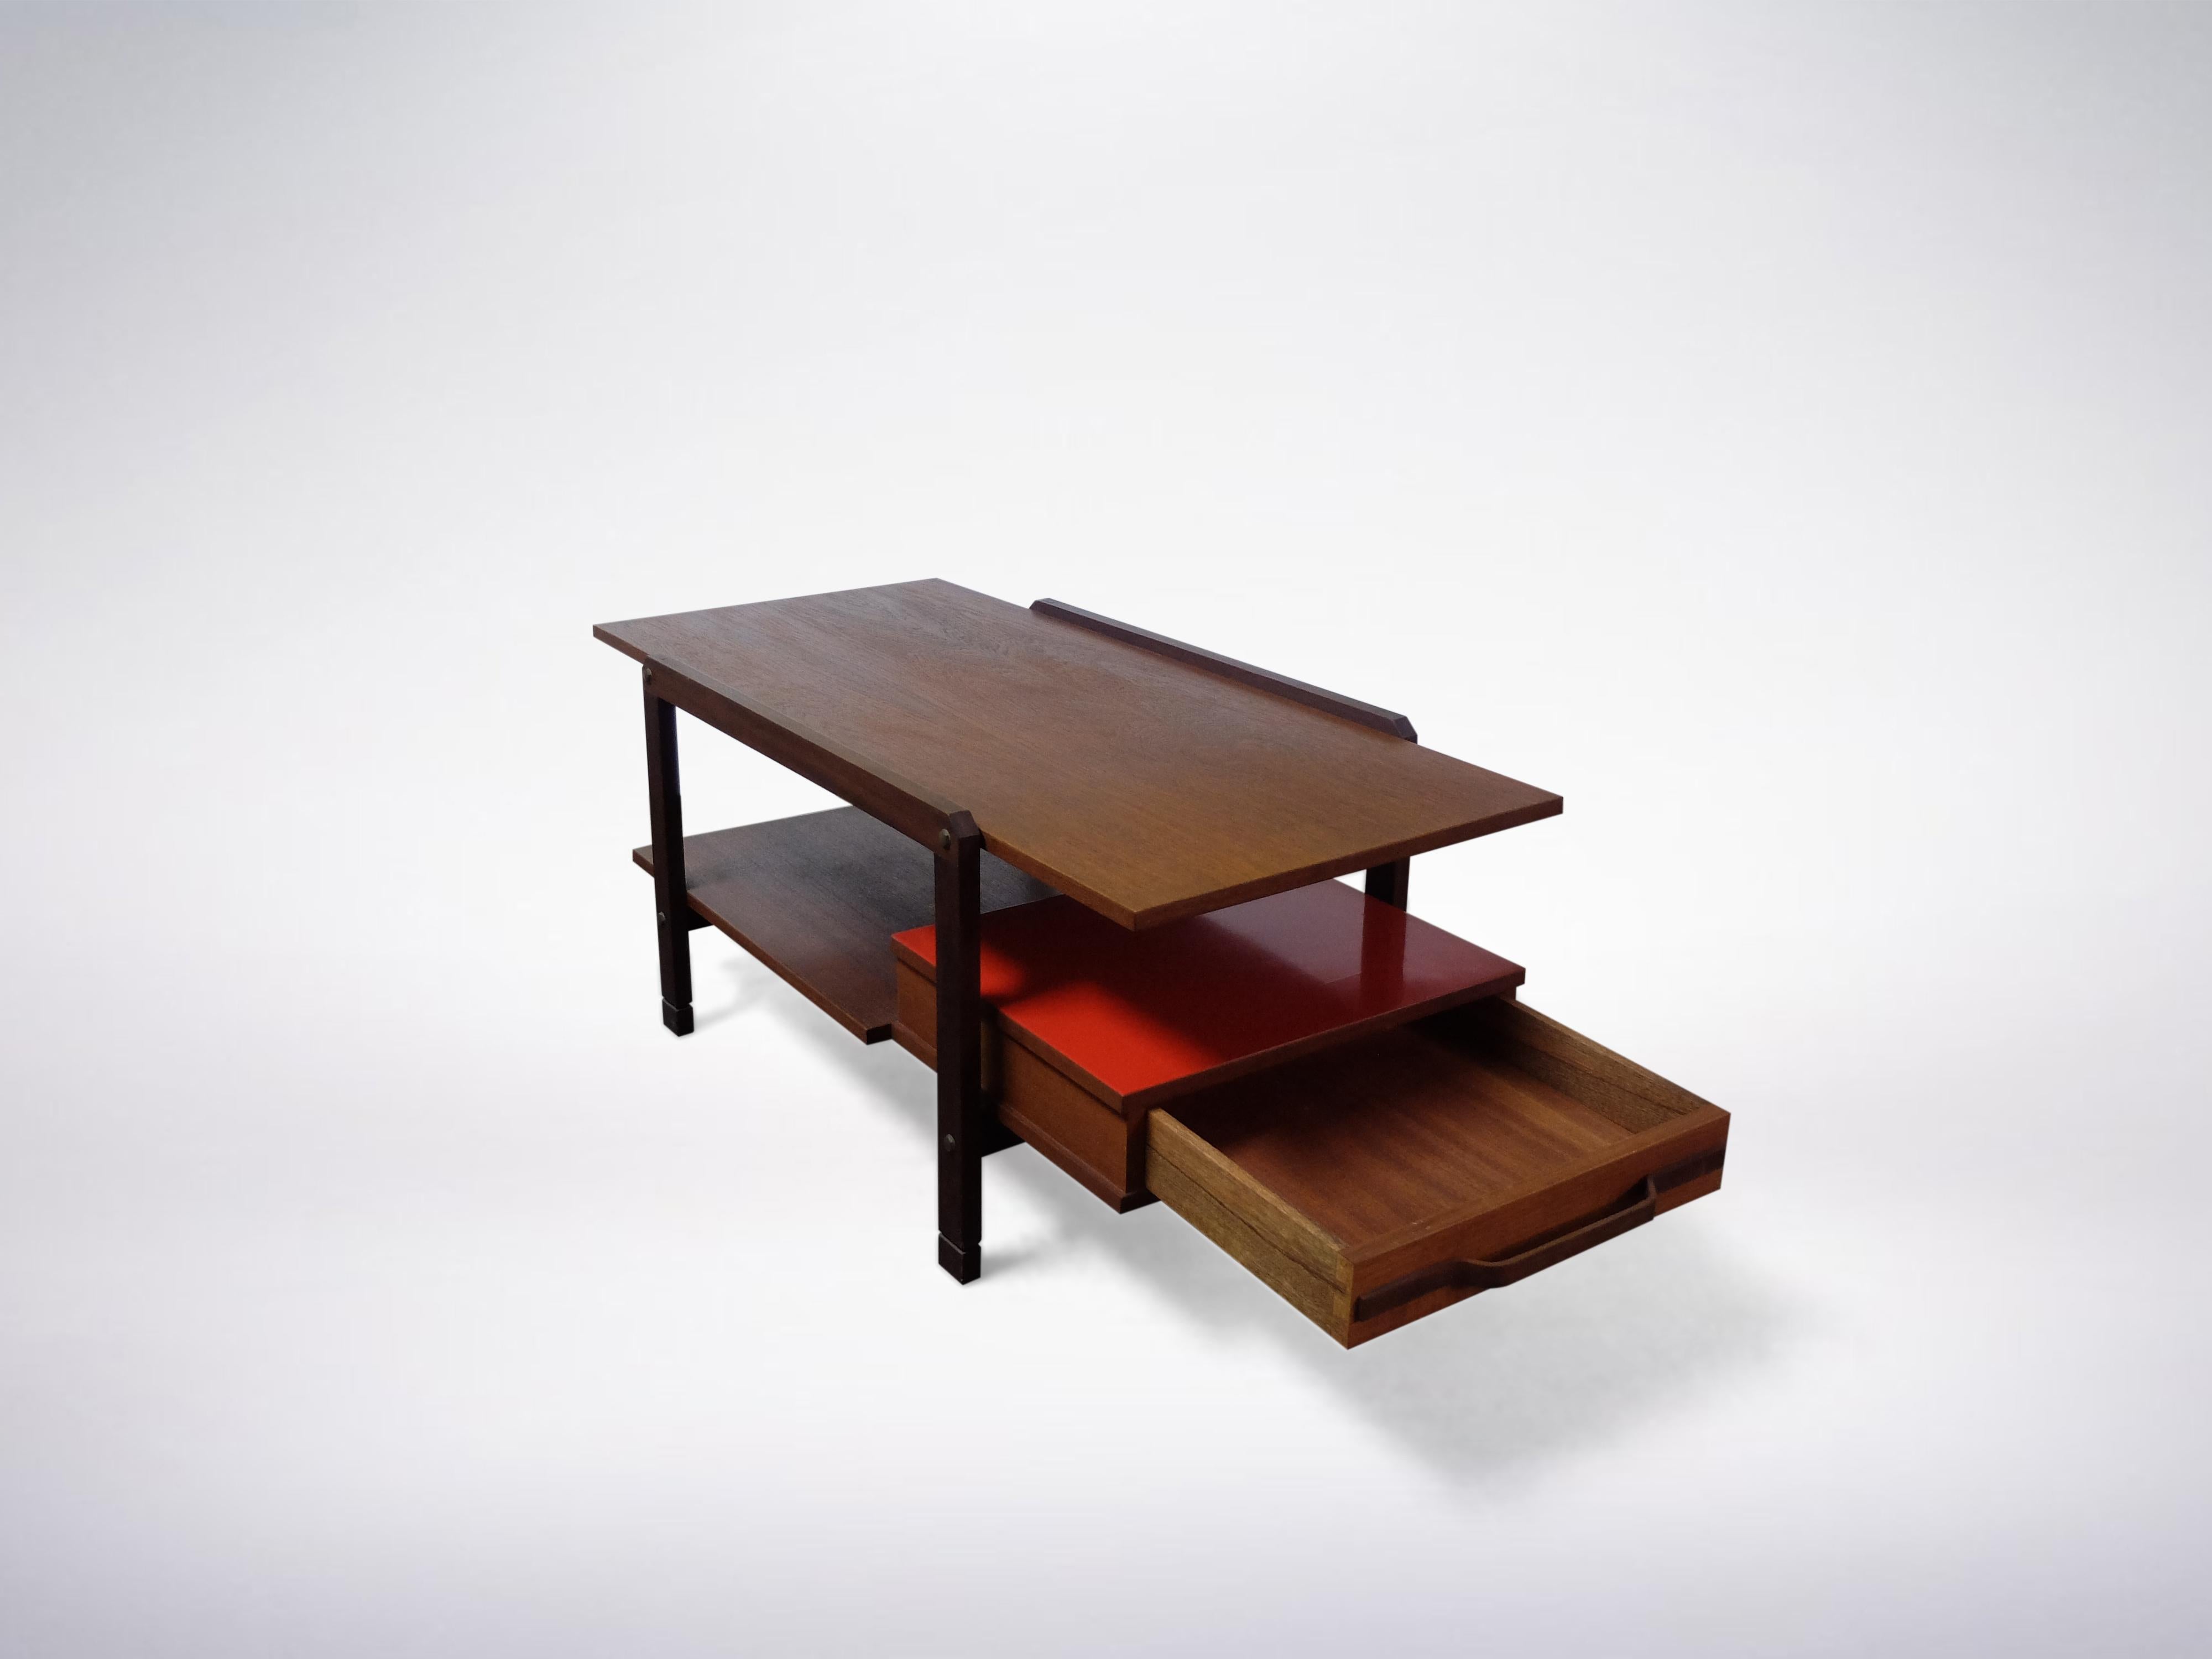 Italian Mid-Century Modern Rationalist coffee table
1950s
Rare lacquered wood low table in two tiers with a red drawer. This well maintained coffee table is elegant and sleek. There is a fine finish to its look with the existence of three panes